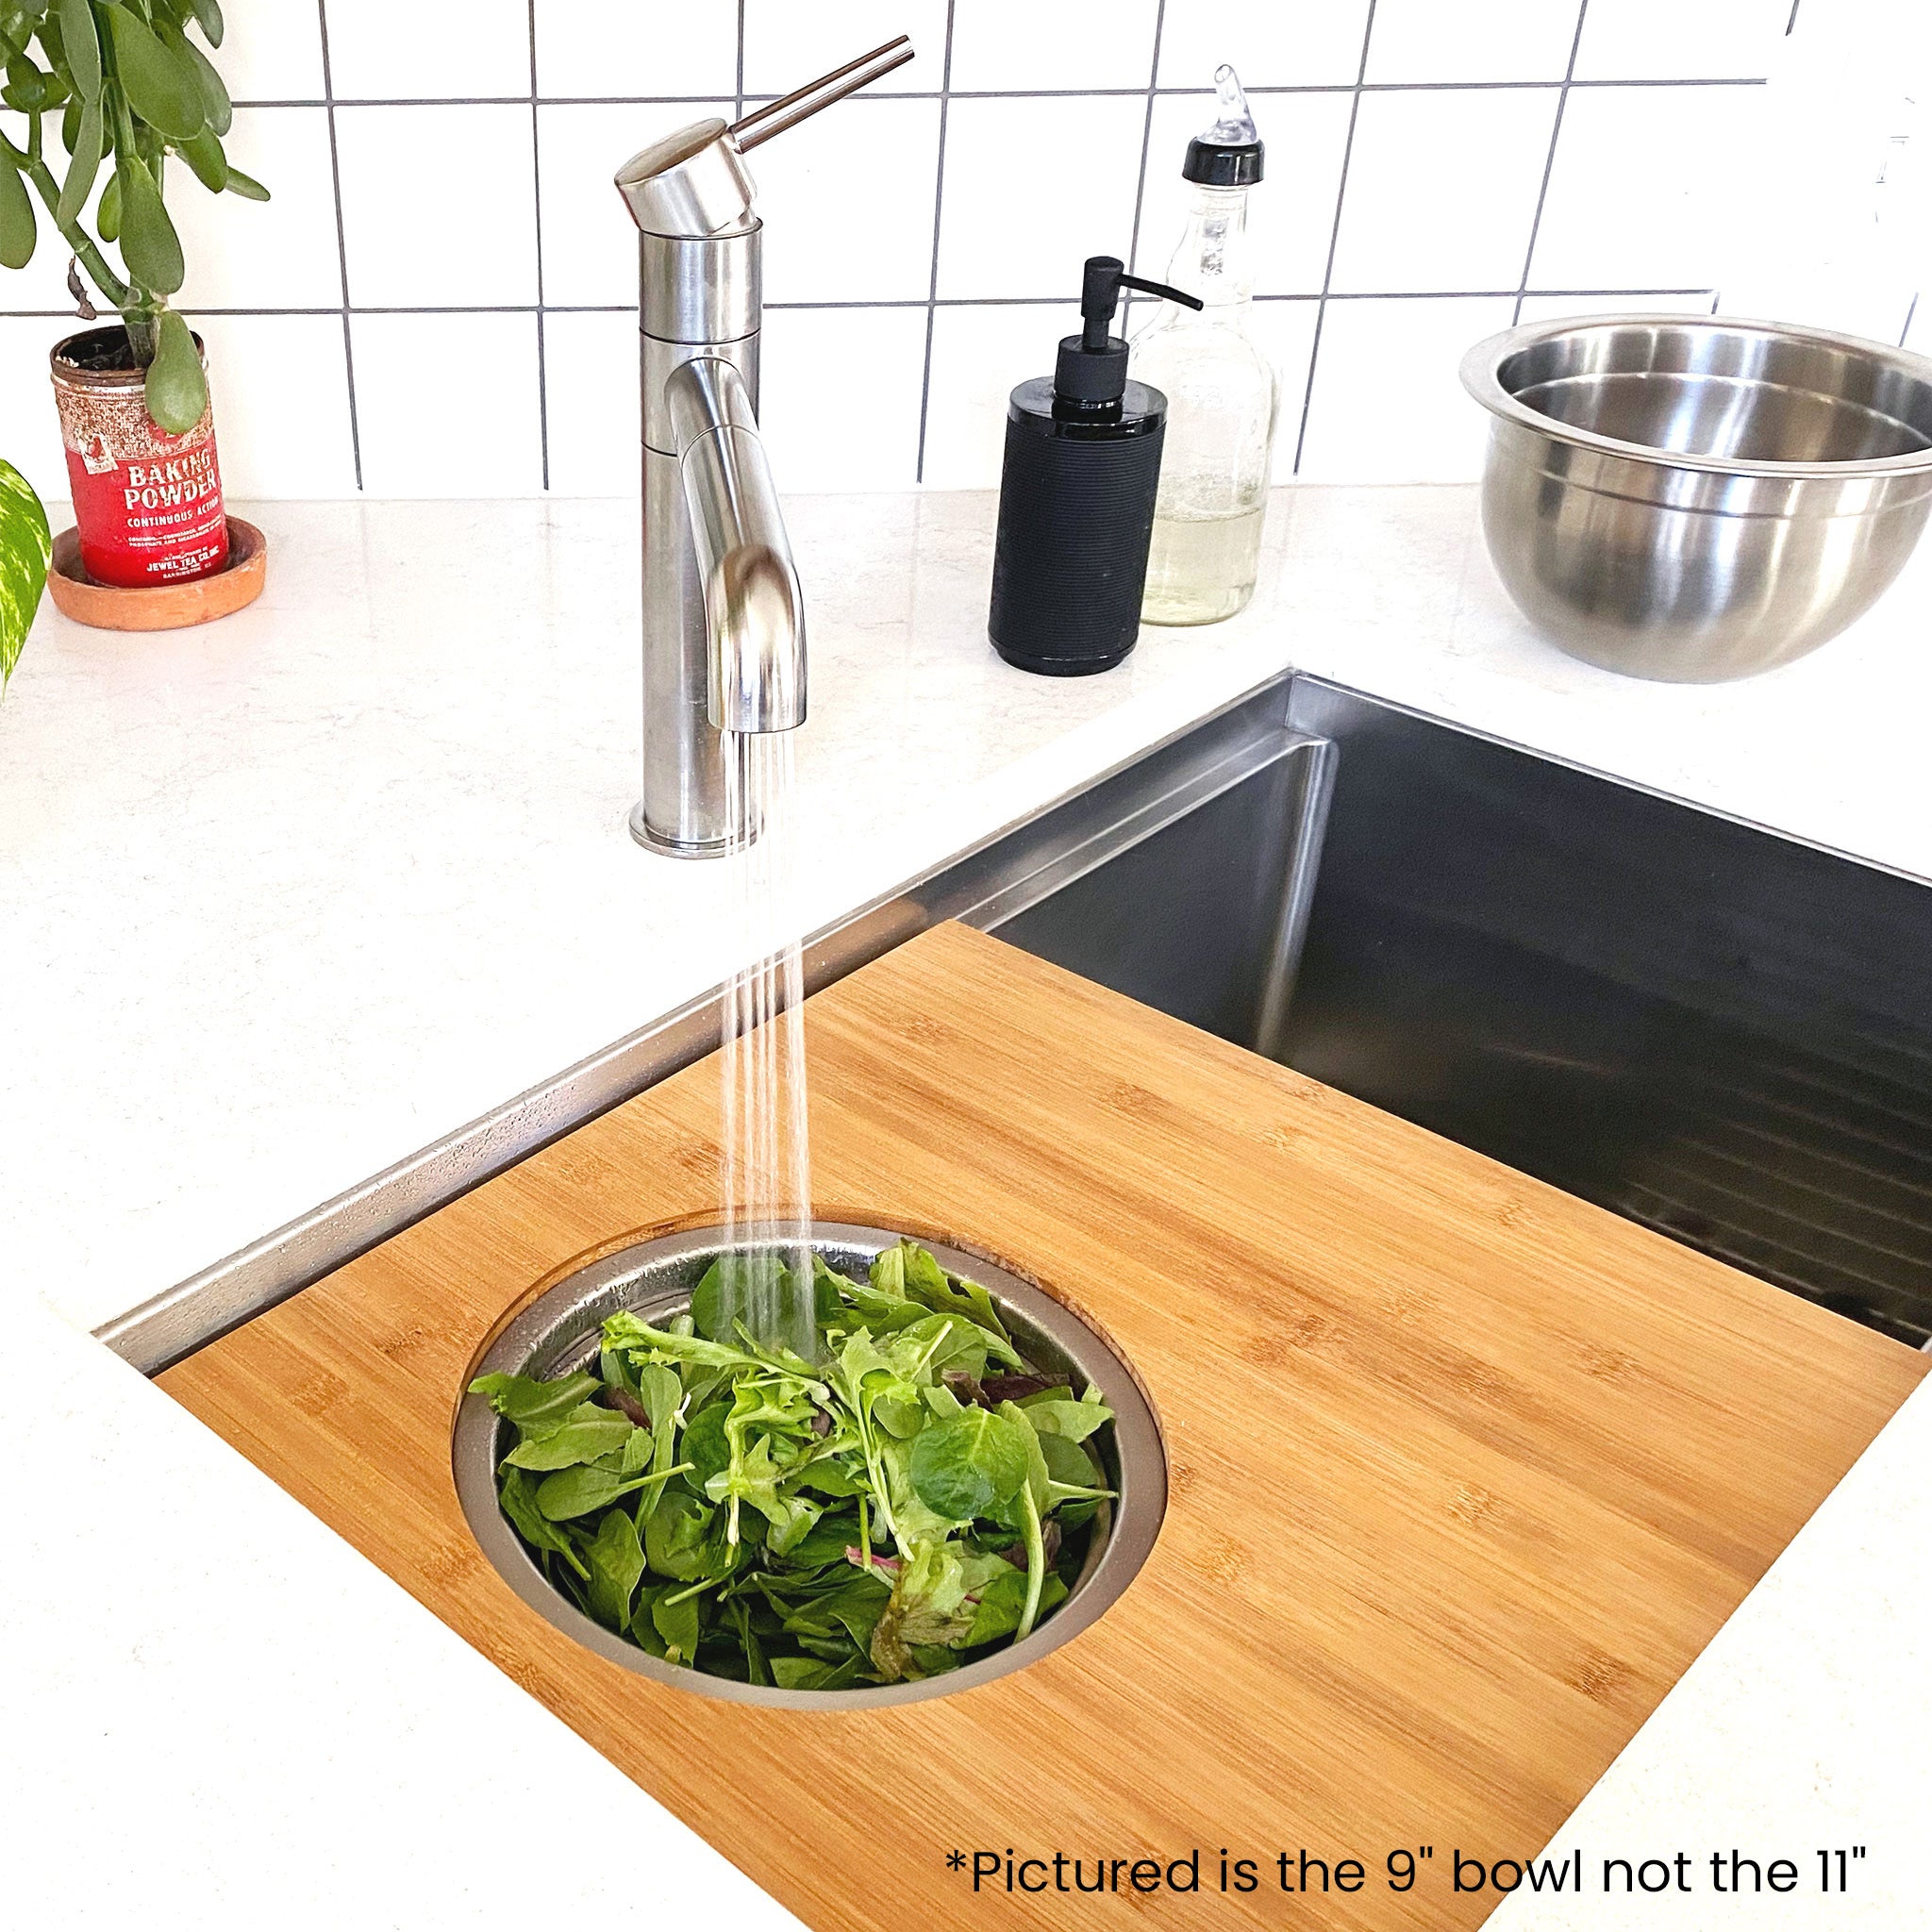 Workstation Sink Accessory - 18" Bamboo Cutting Board with 11" Stainless Steel Colander and Mixing Bowl